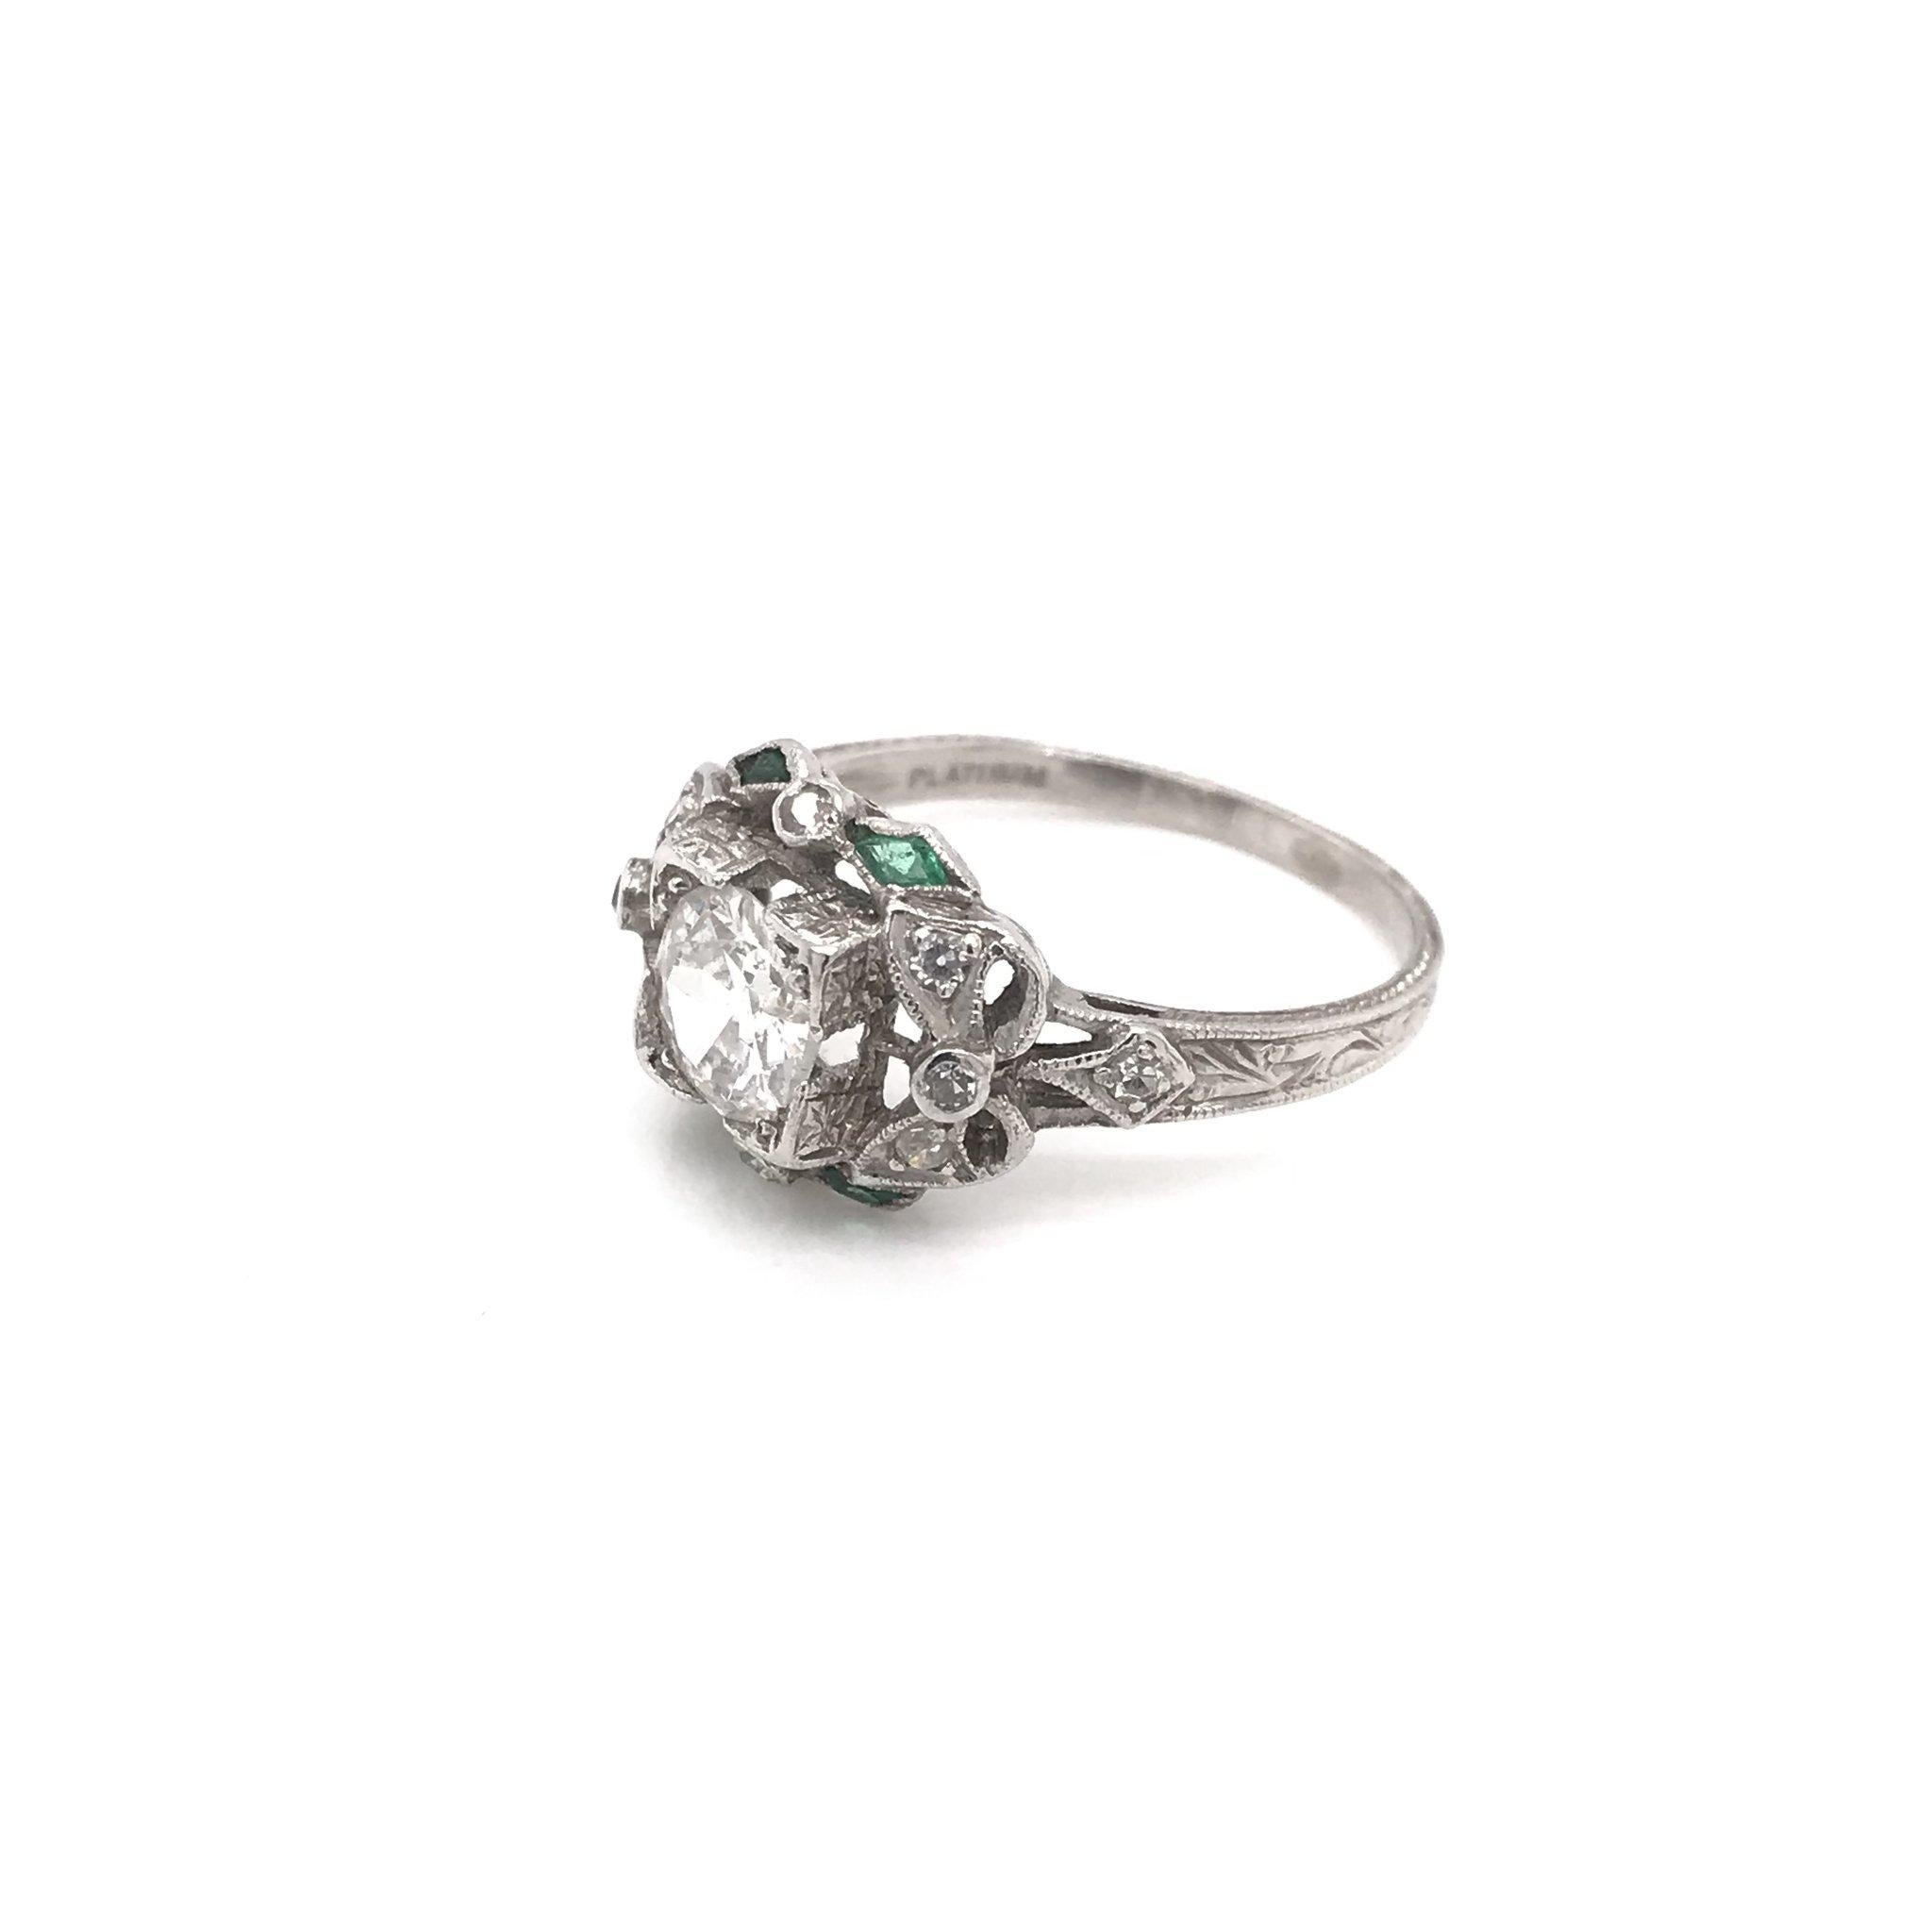 This exquisite antique piece was handcrafted sometime during the Edwardian design period ( 1900-1920 ). The platinum setting features a center diamond measuring approximately 0.90 carats. The center diamond grades approximately F in color, Vs1